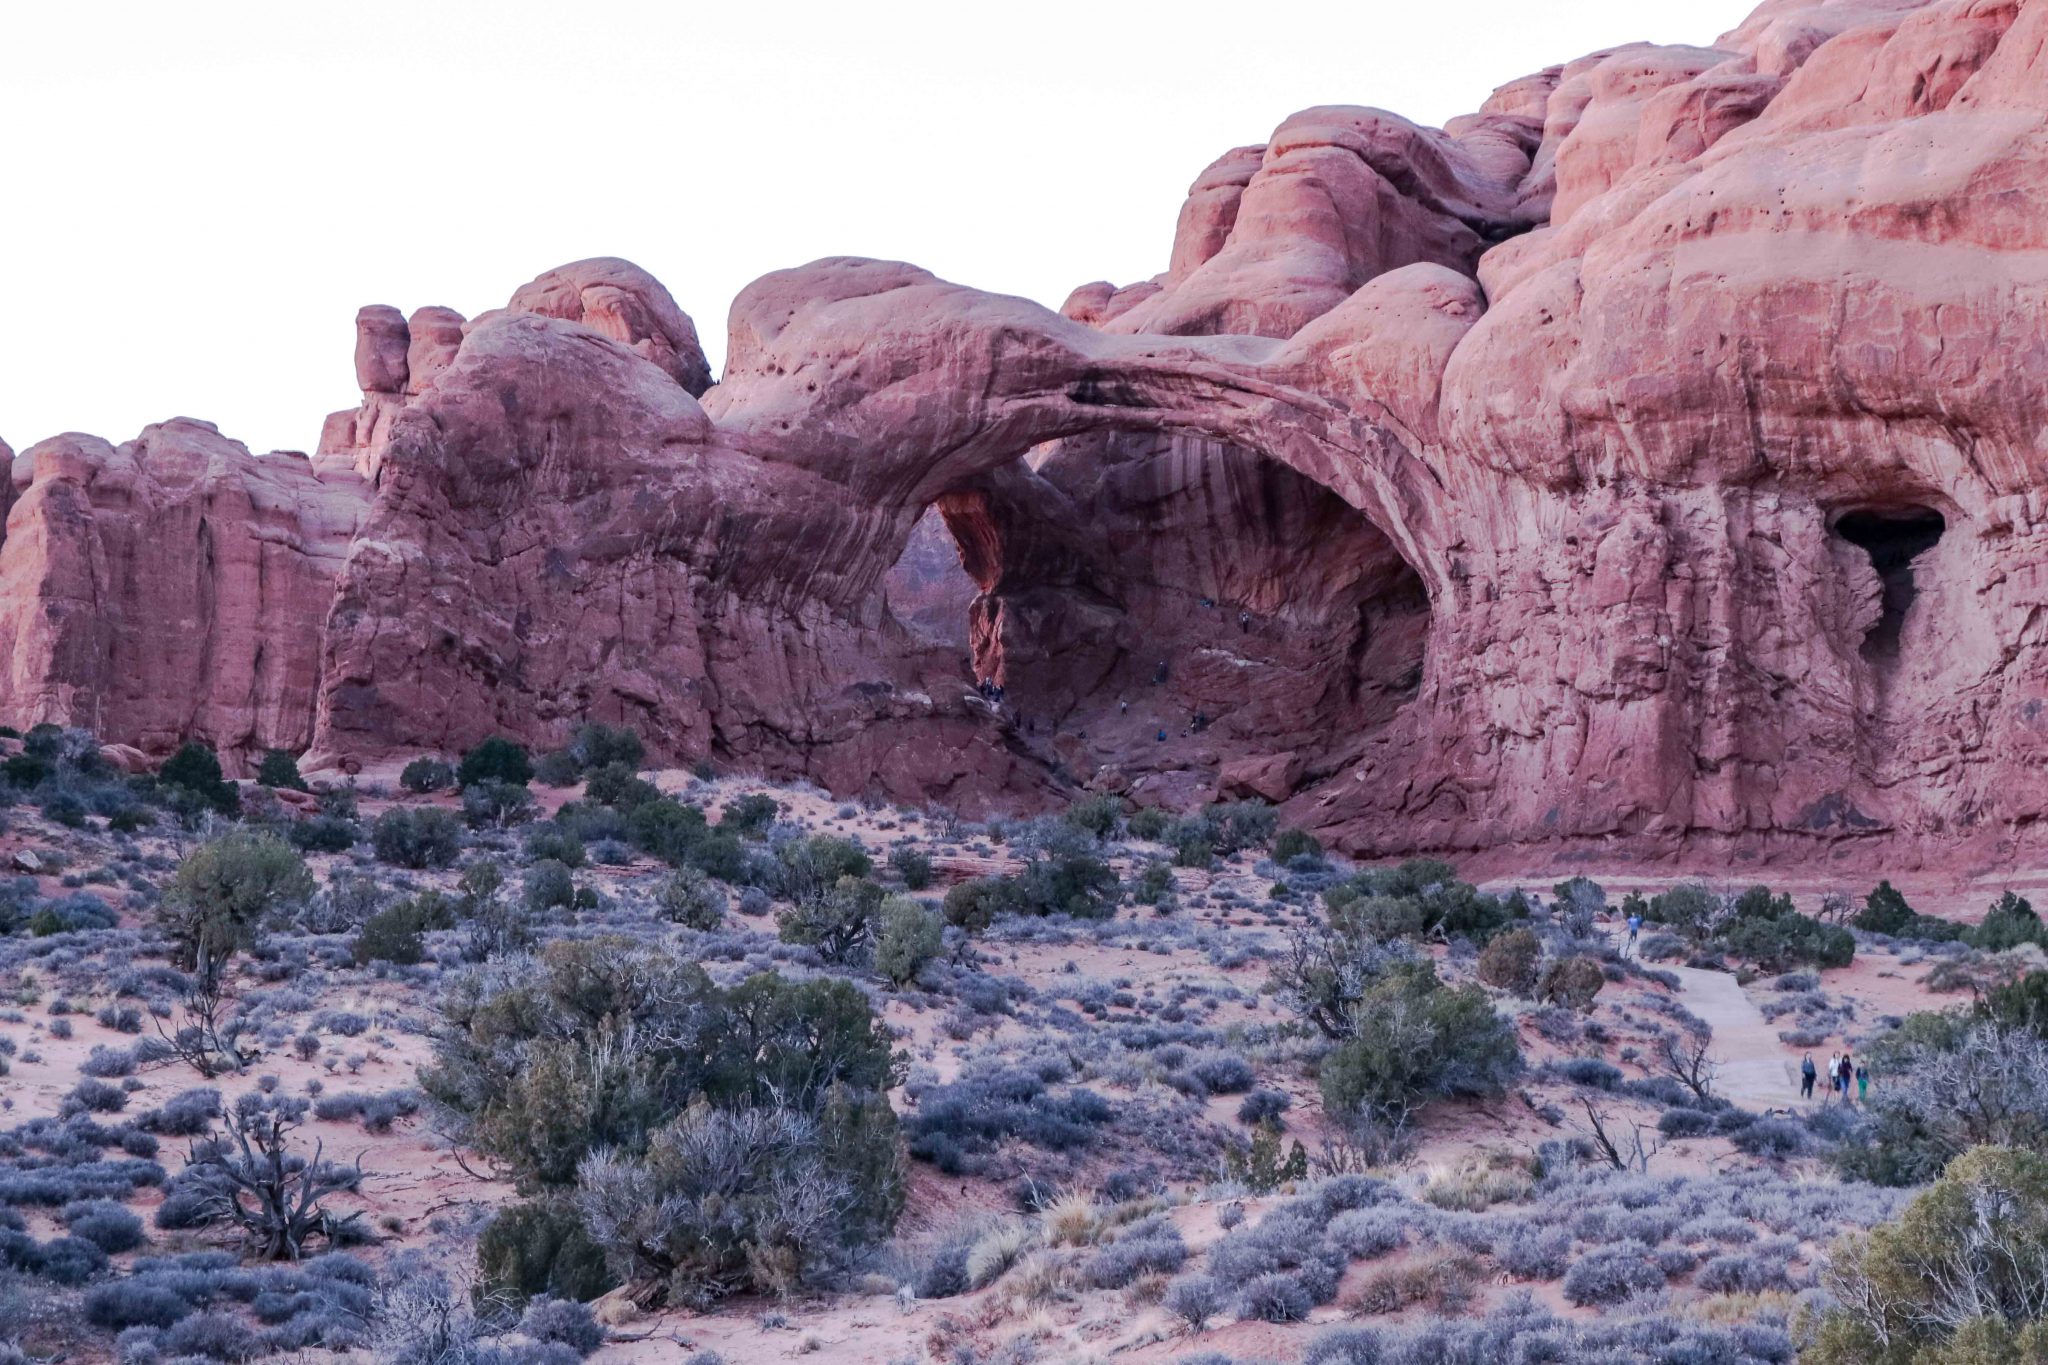 Arches - From Las Vegas to Moab: 5 tips for your road trip: Bryce Canyon, Arches National Park, Canyonlands national park